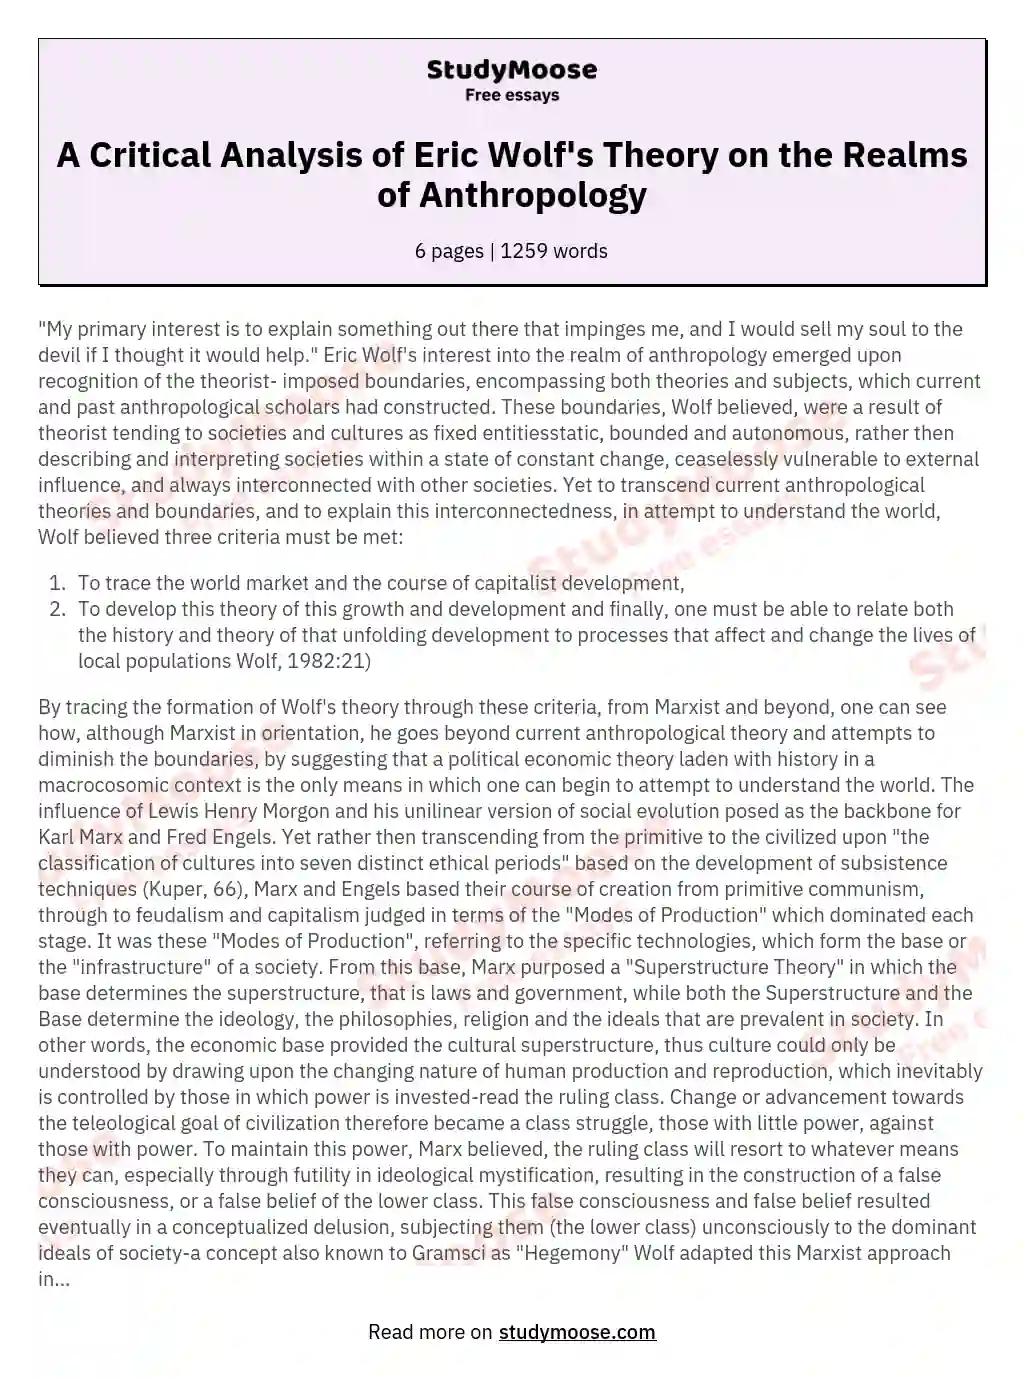 A Critical Analysis of Eric Wolf's Theory on the Realms of Anthropology